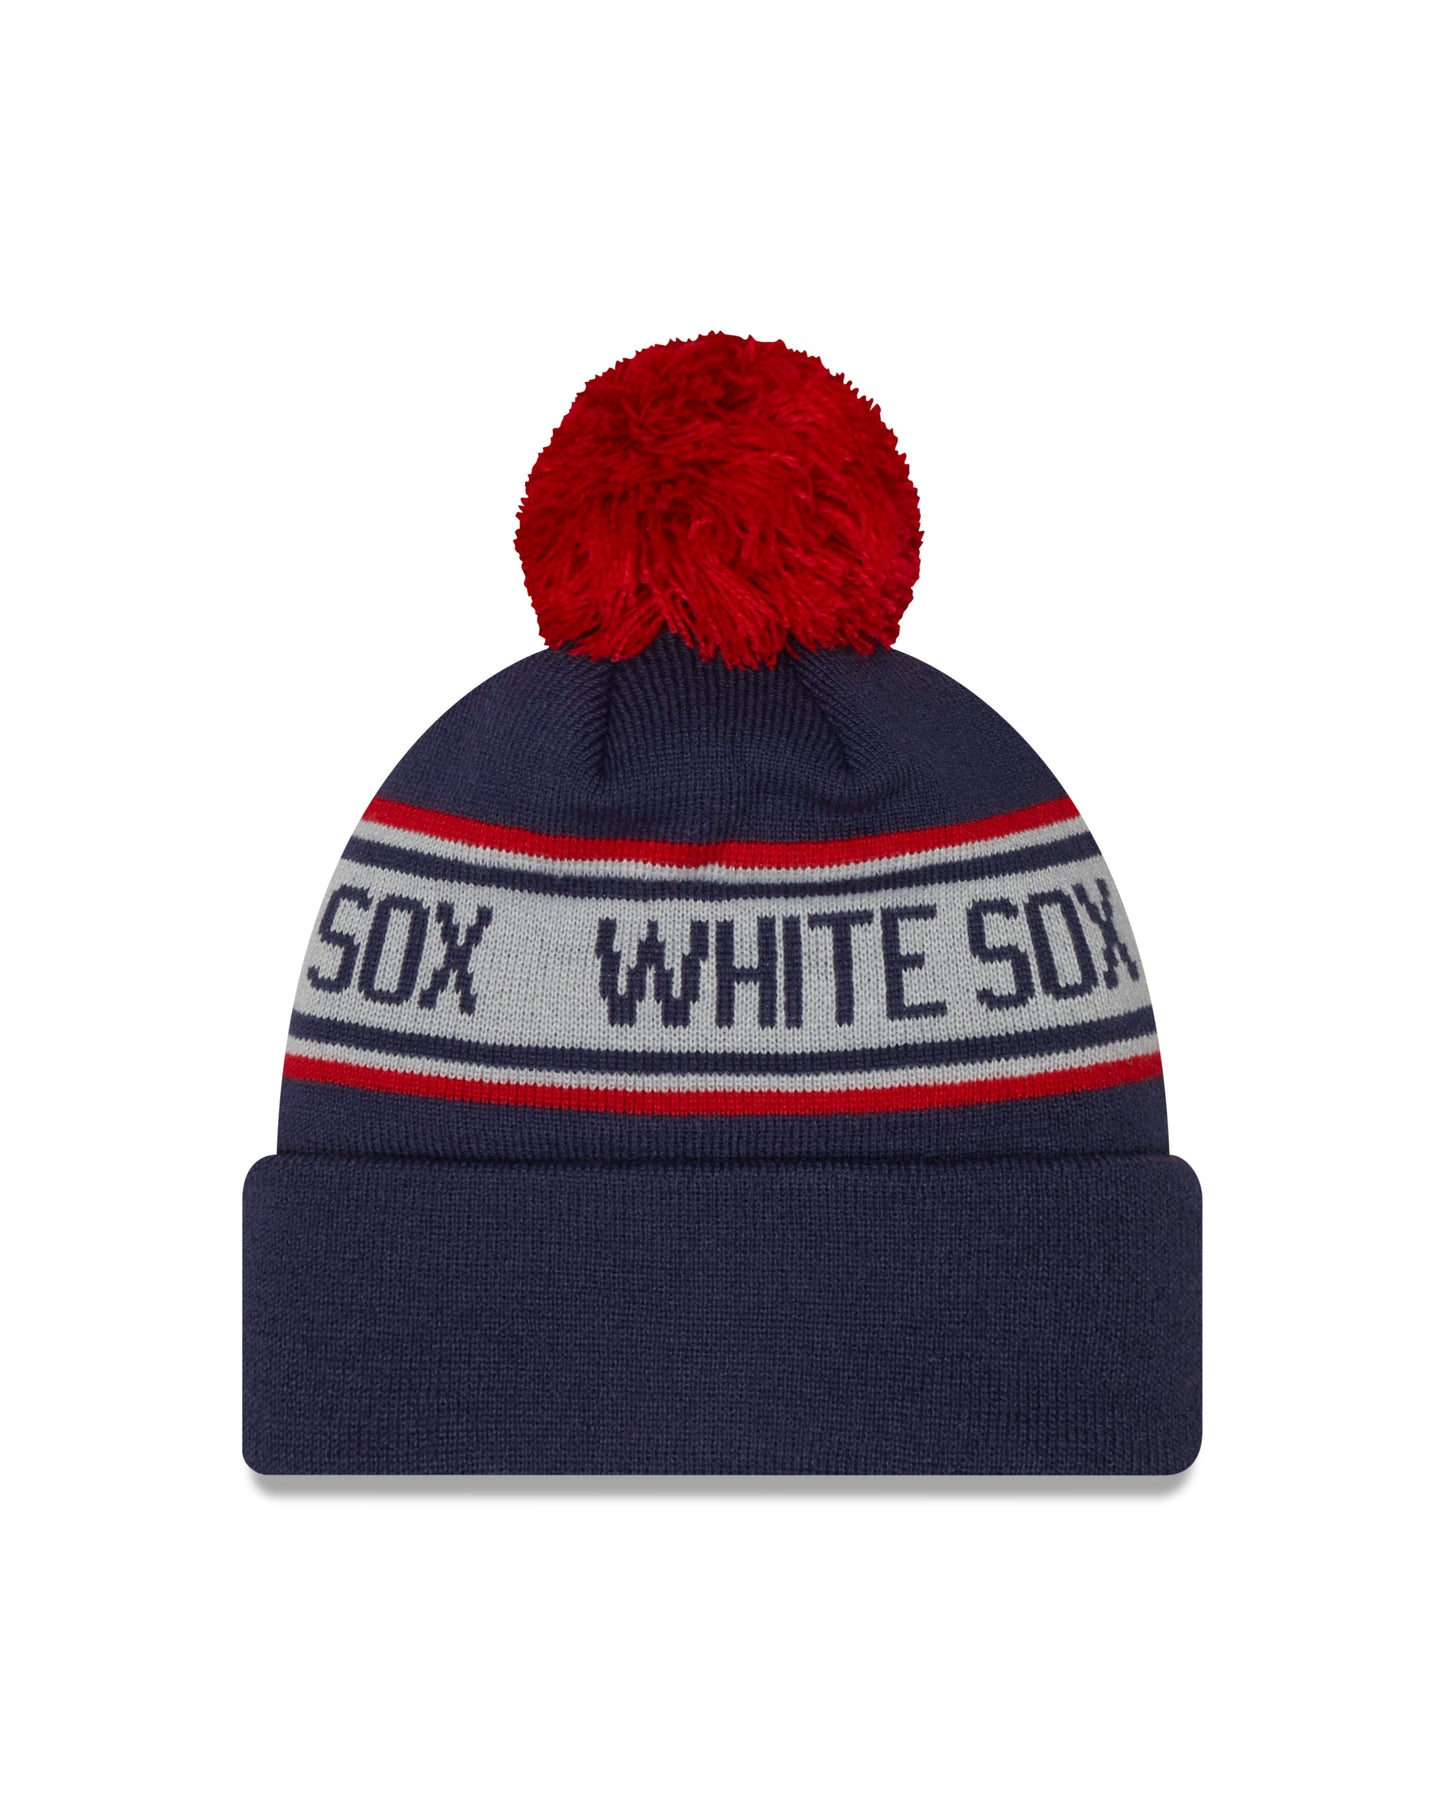 Chicago White Sox New Era Cooperstown Collection Navy Repeat Cuffed Pom Knit Hat